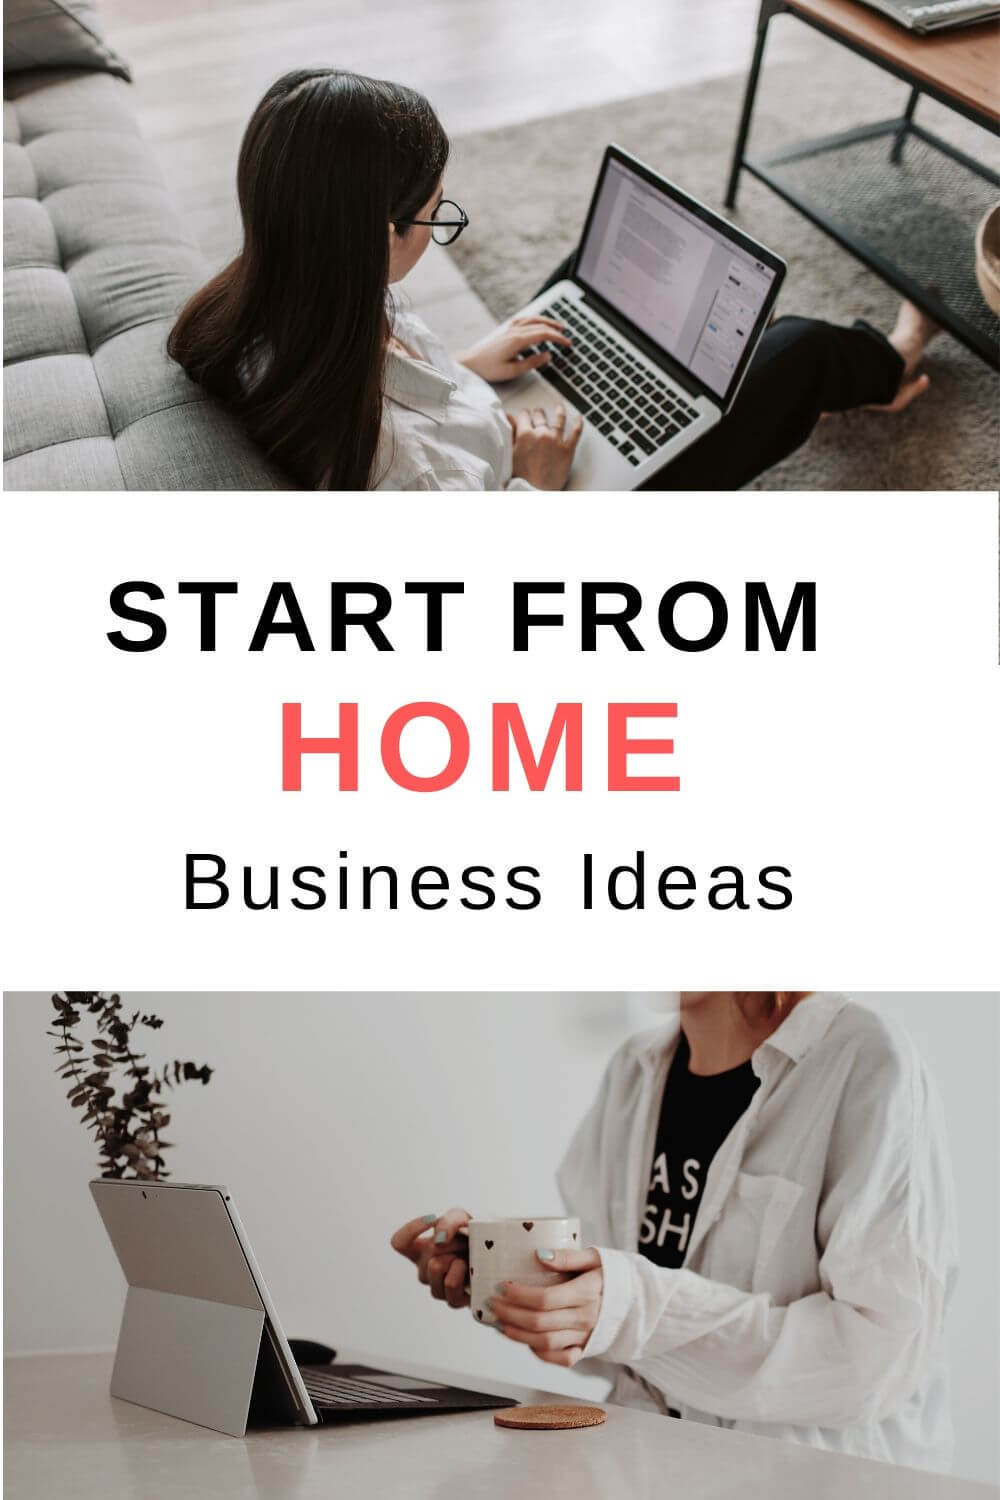 Start from home business ideas